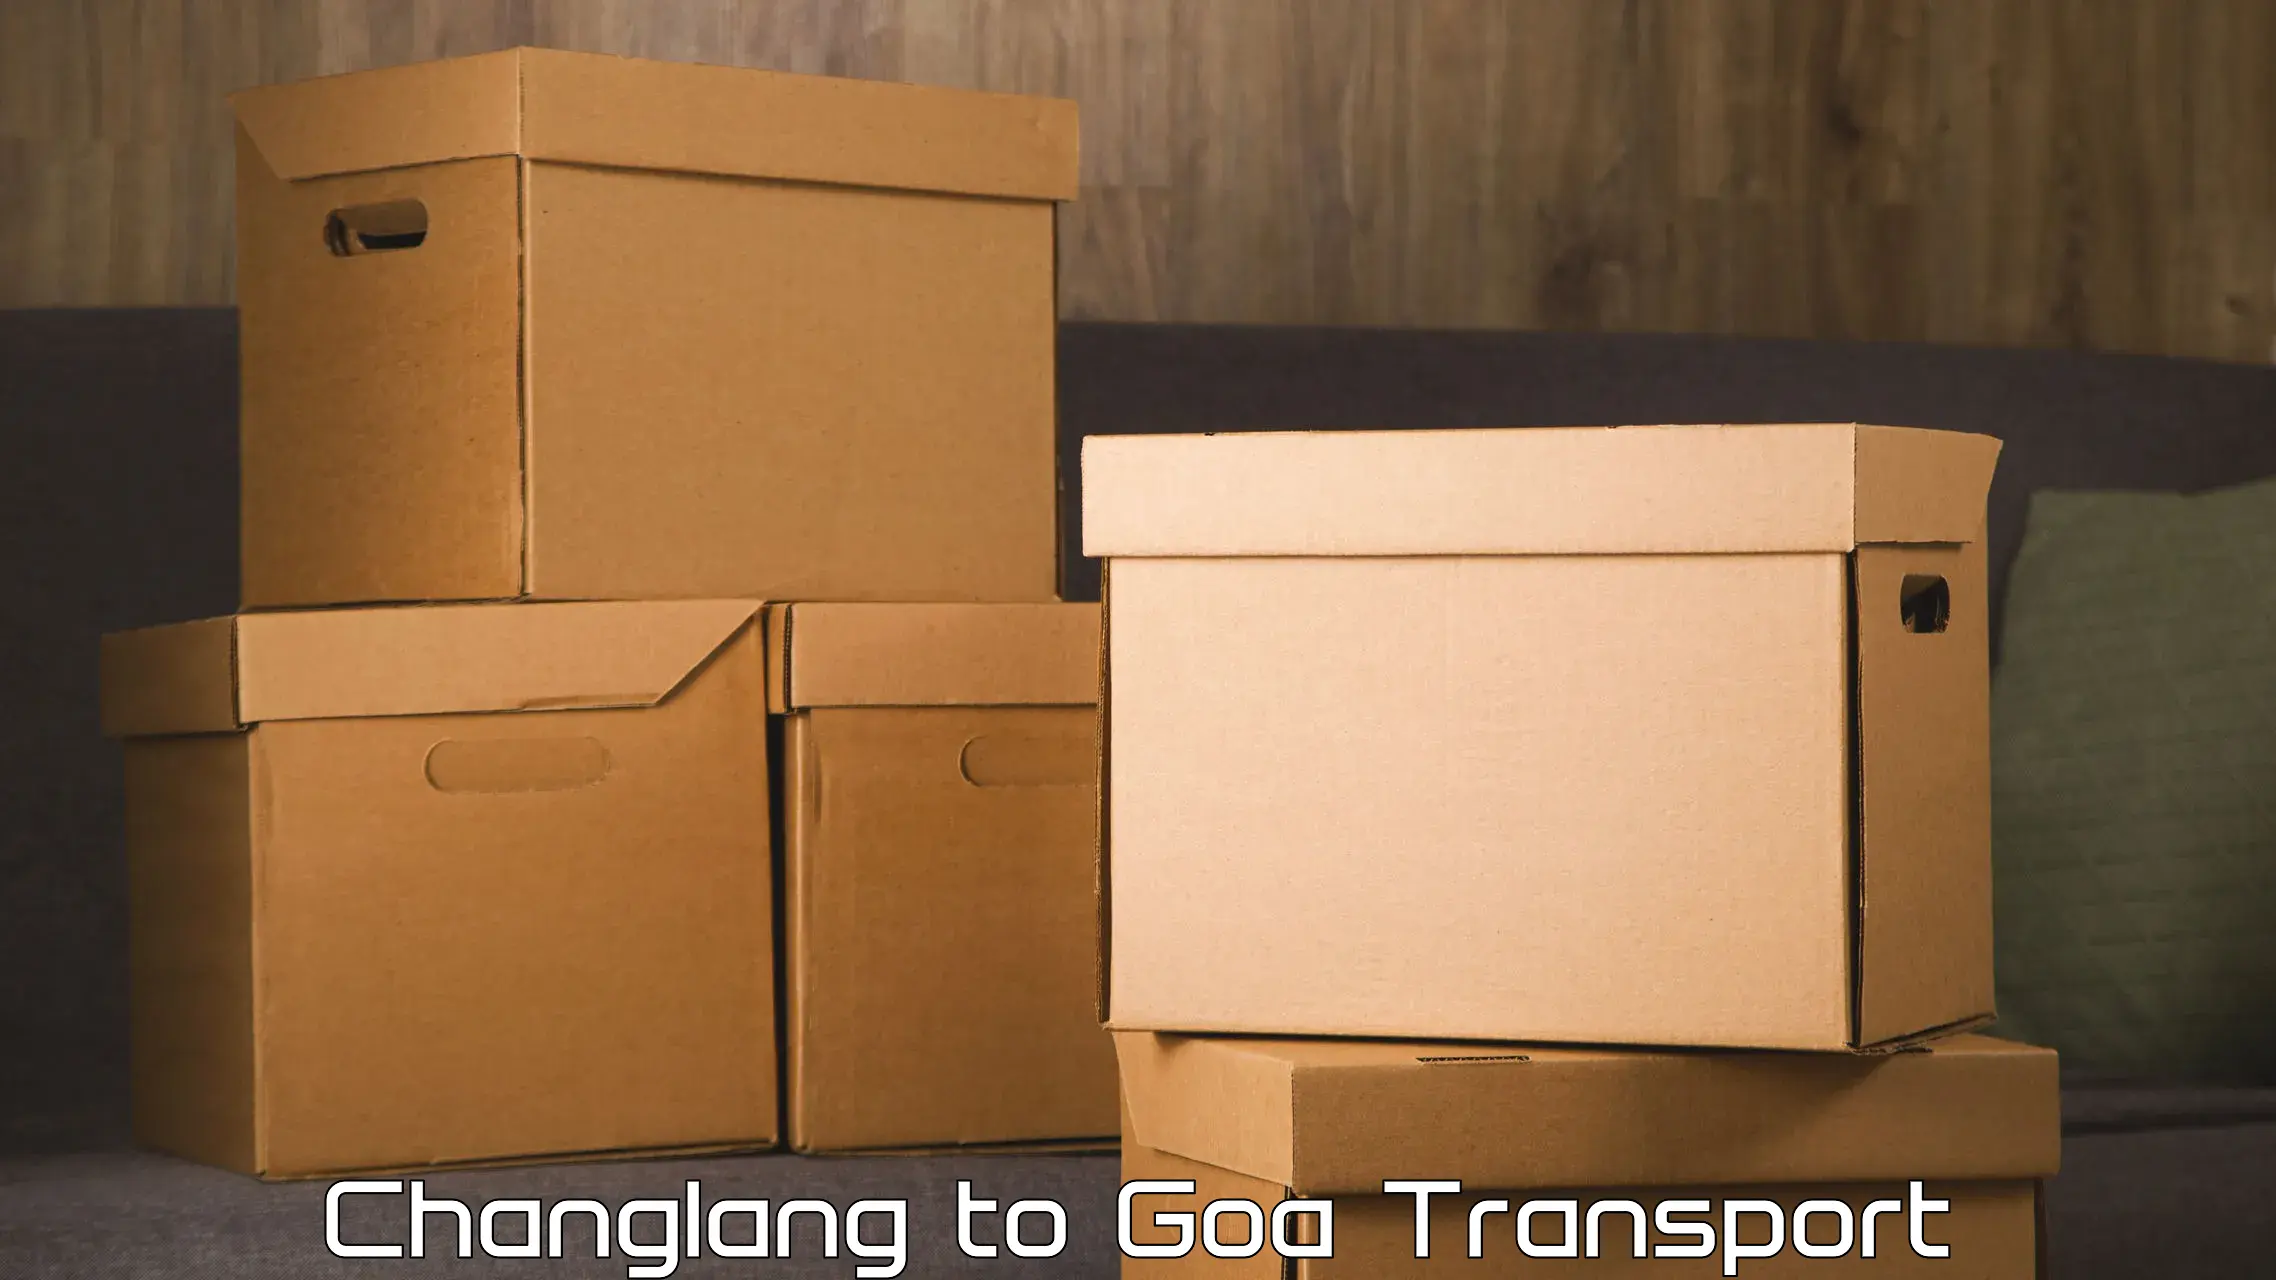 Delivery service Changlang to IIT Goa